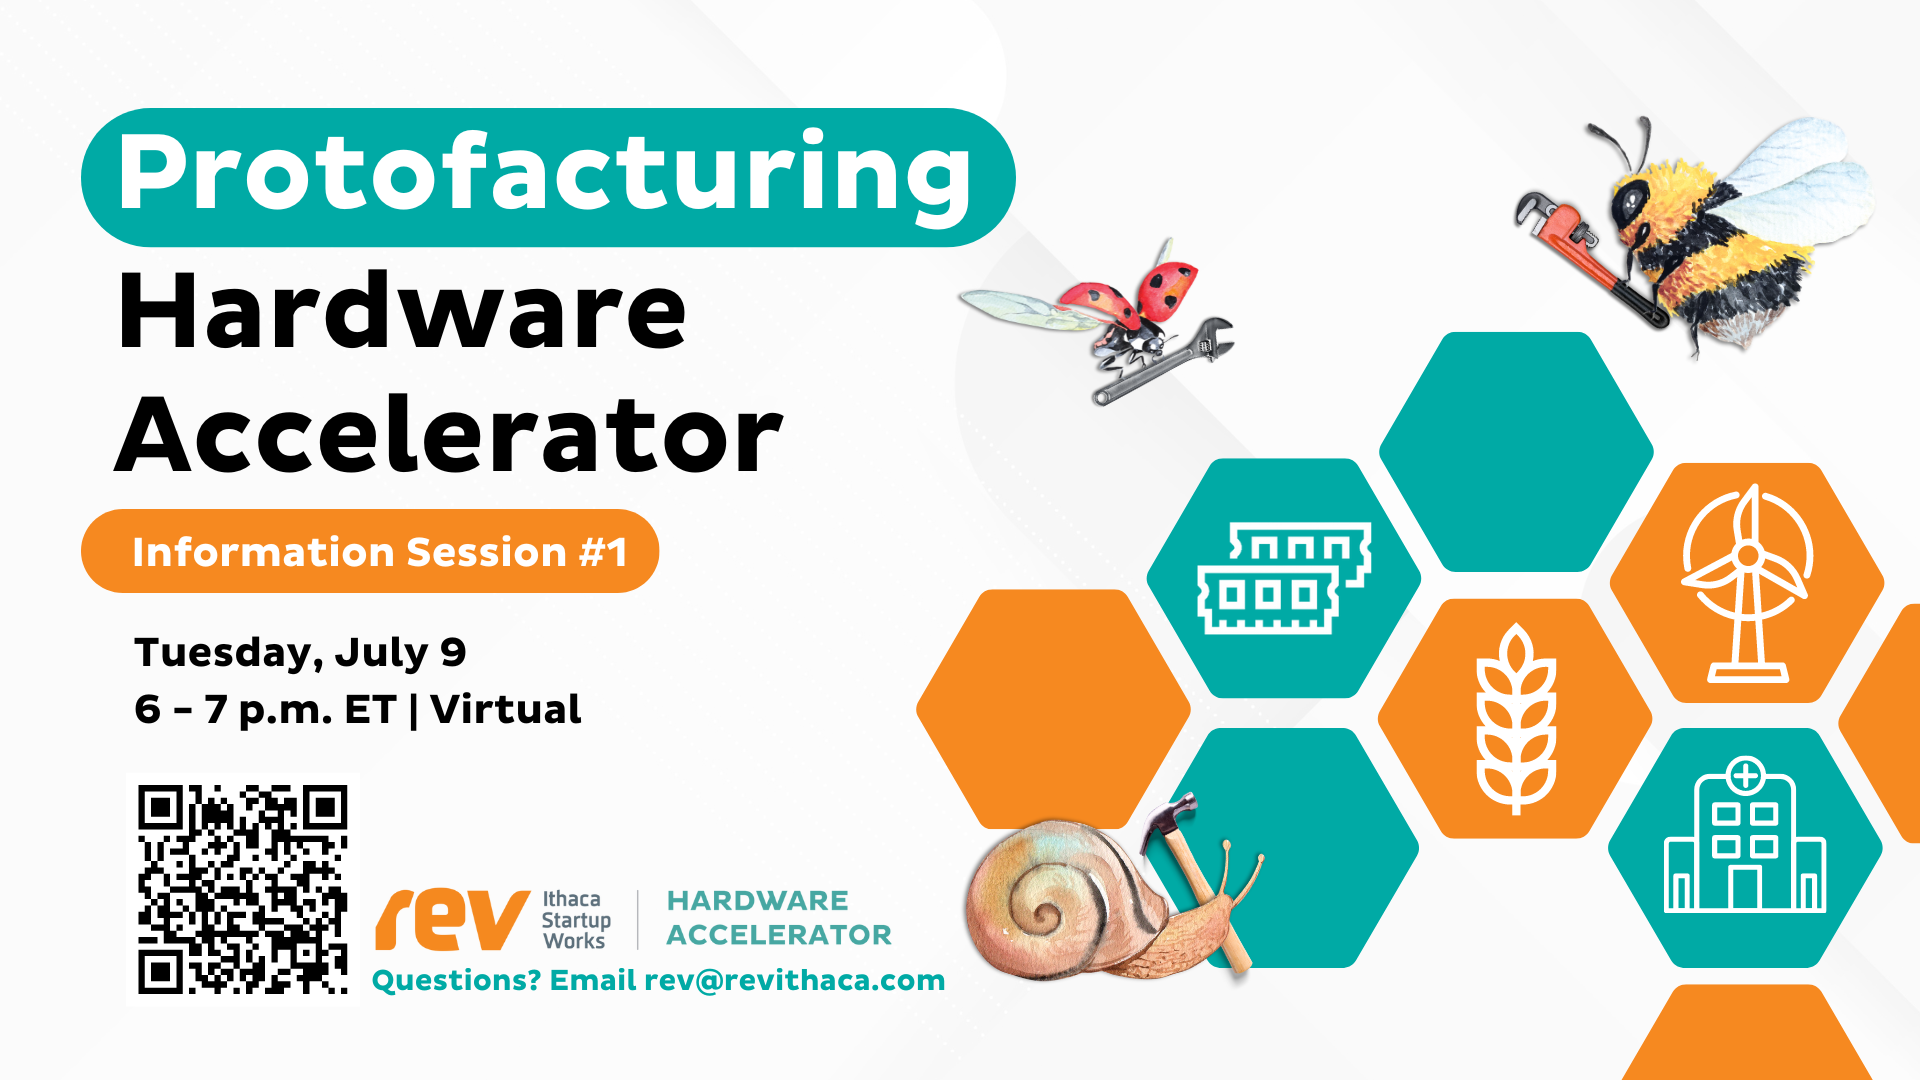 Protofacturing Hardware Accelerator Information Session One on July 9th.